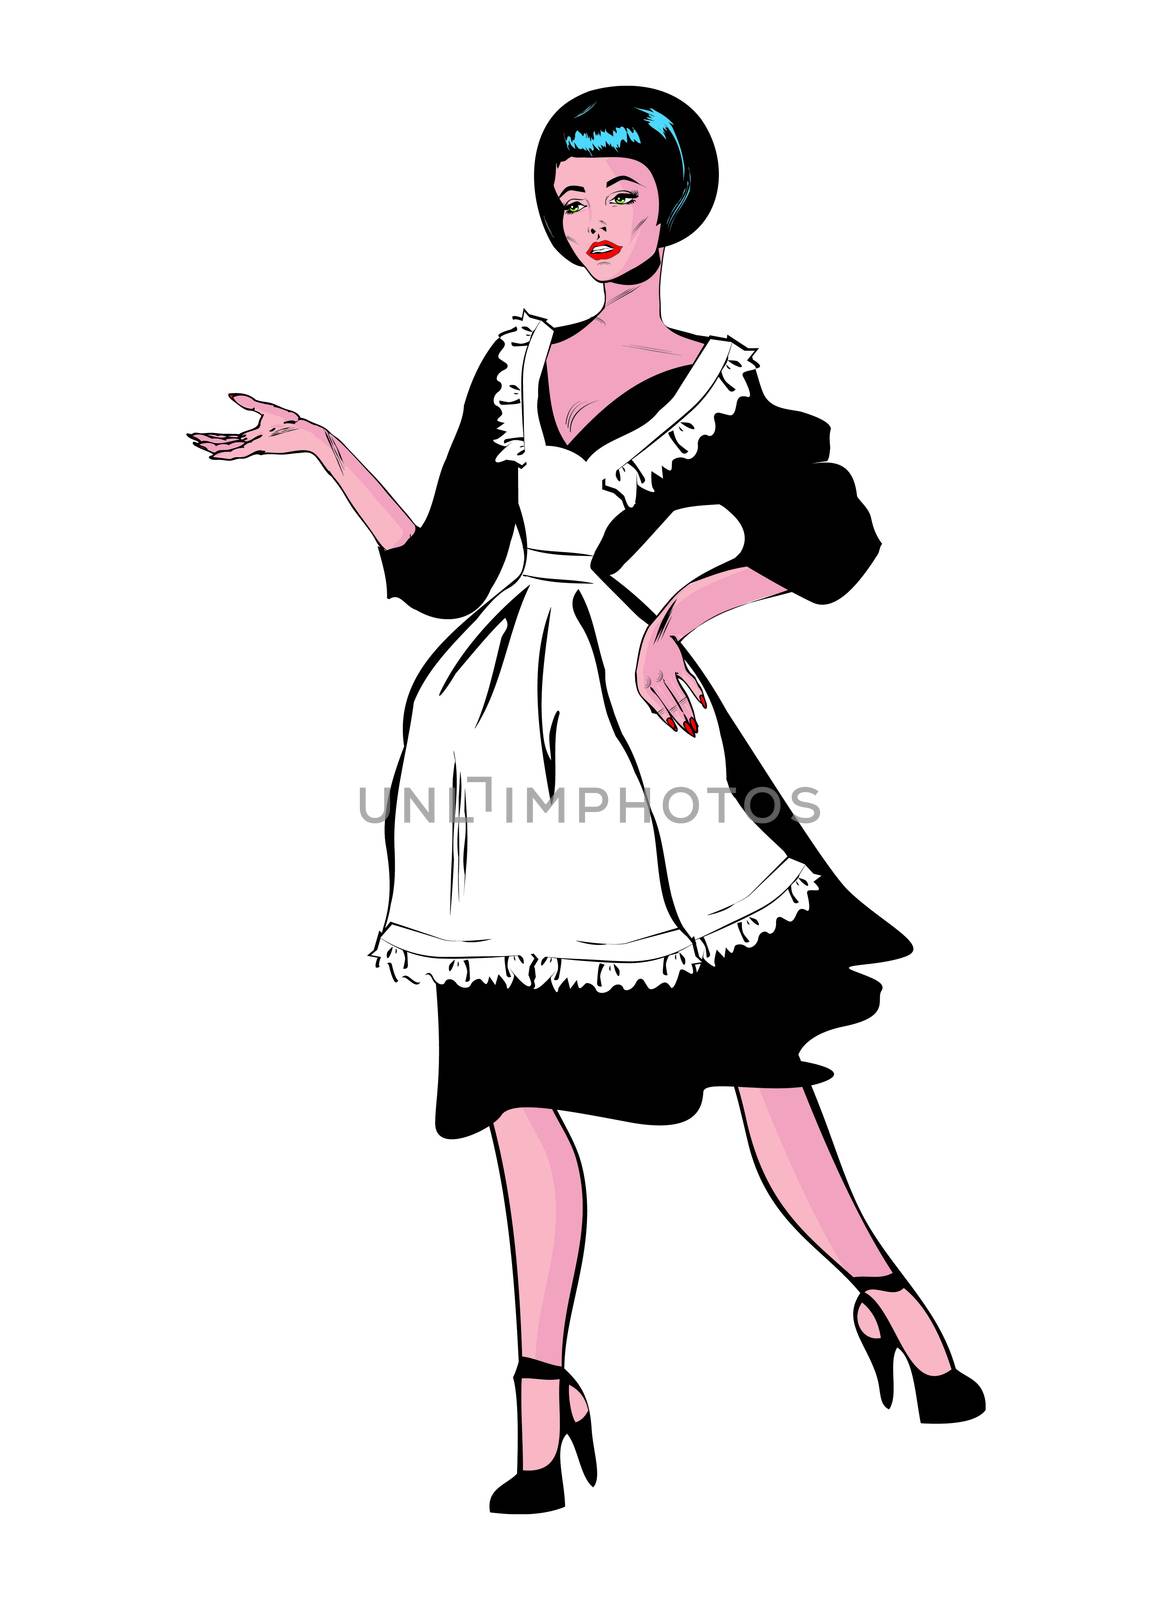 Helpful Housewife - Retro Clip Art in popart vintage style